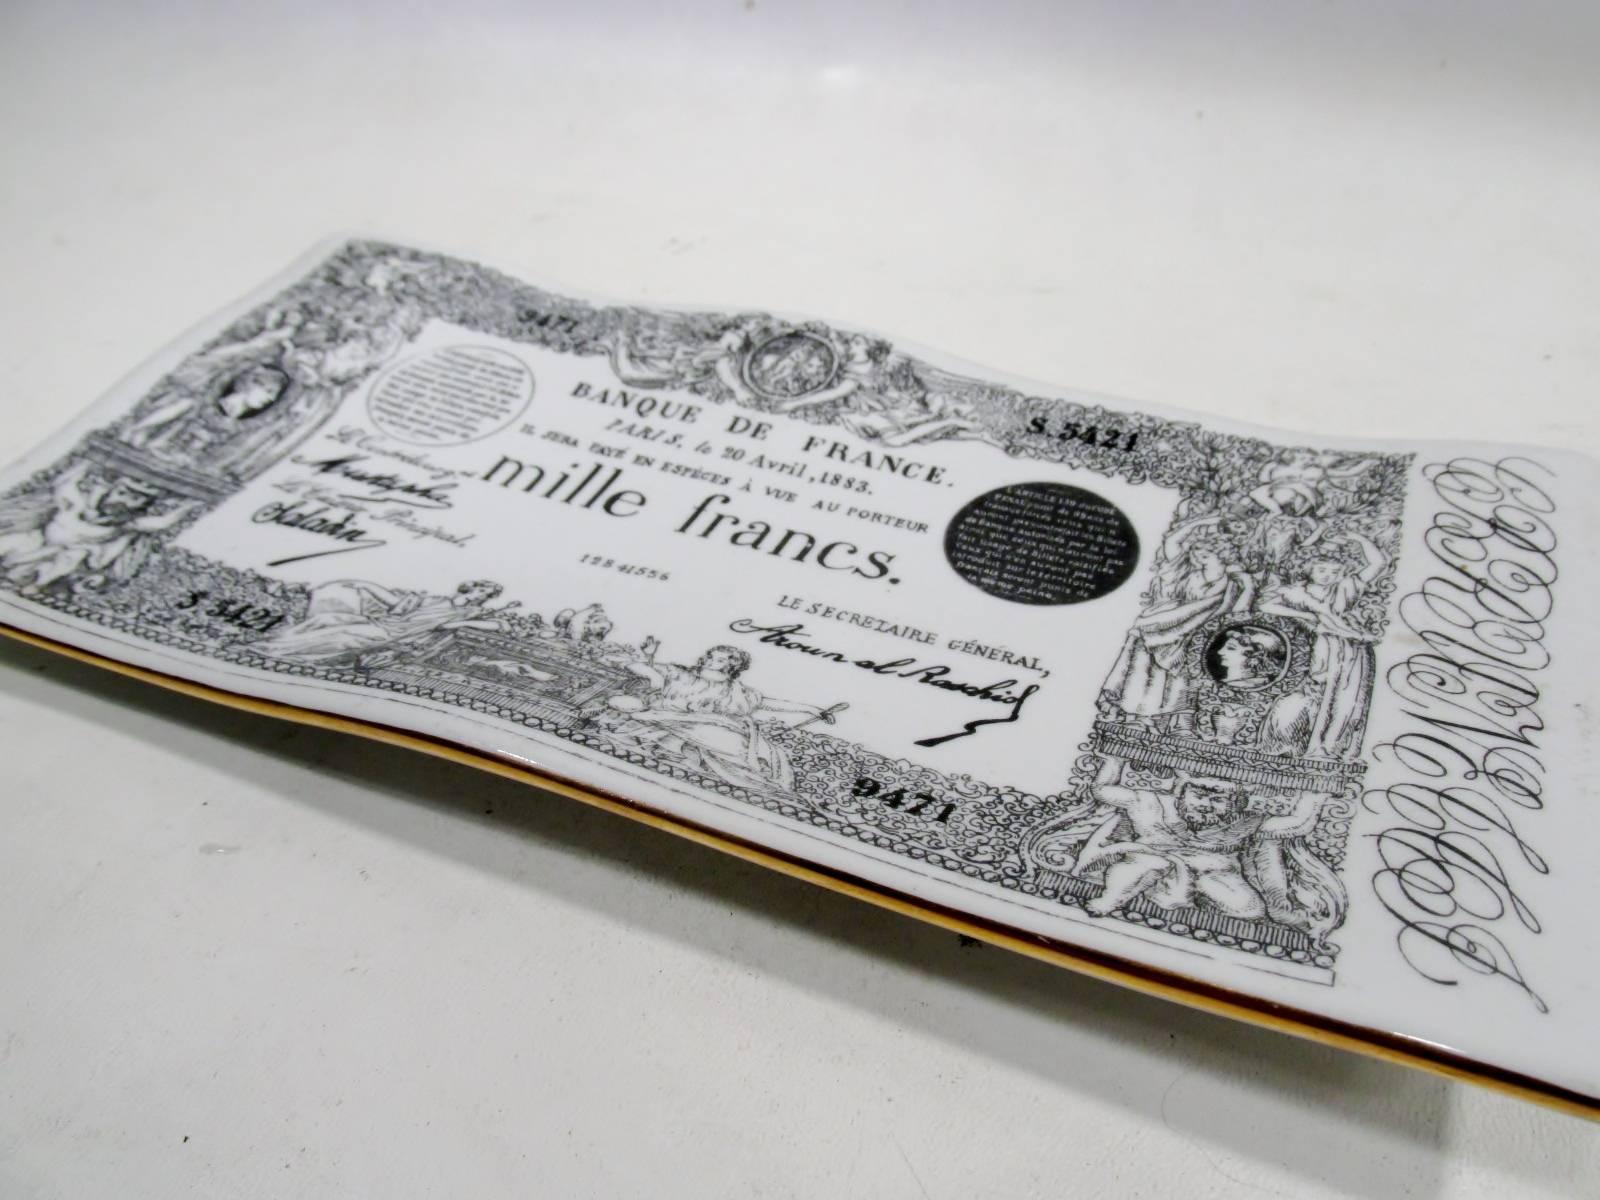 Early production Piero Fornasetti Italy “Mille Francs” ceramic vide poche tray. Approx. 9.75” long, 4.75” wide and 1” tall, mark dates to the 1950s with black printed decoration and gilt rim. Often time referred to as a desk pen tray, a “vide poche”